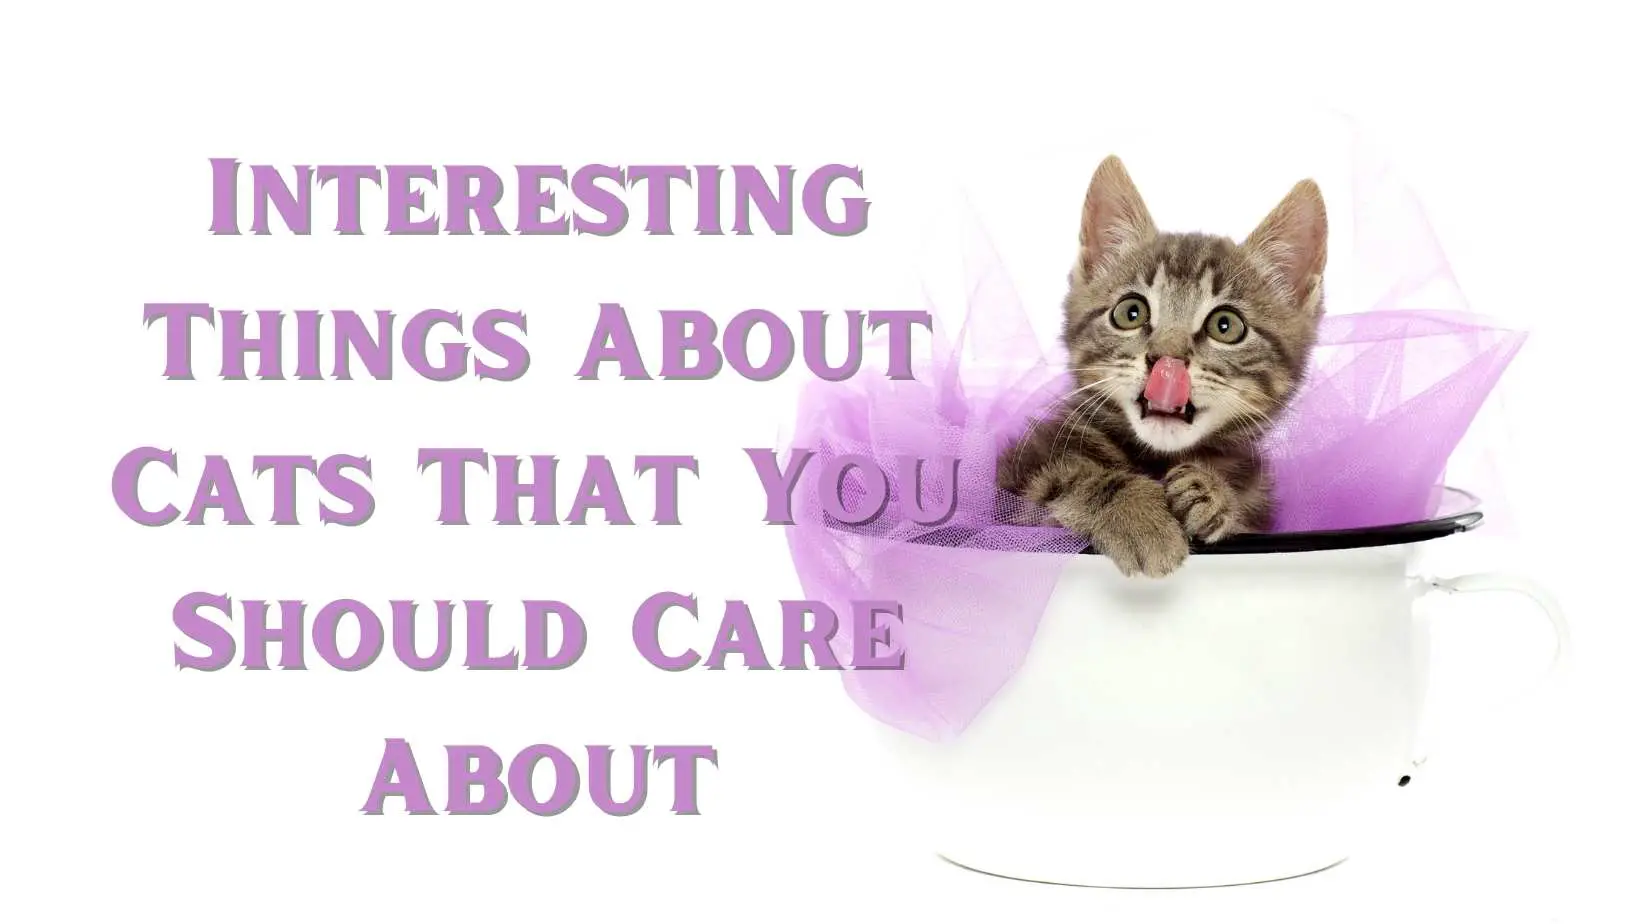 Interesting Things About Cats That You Should Care About